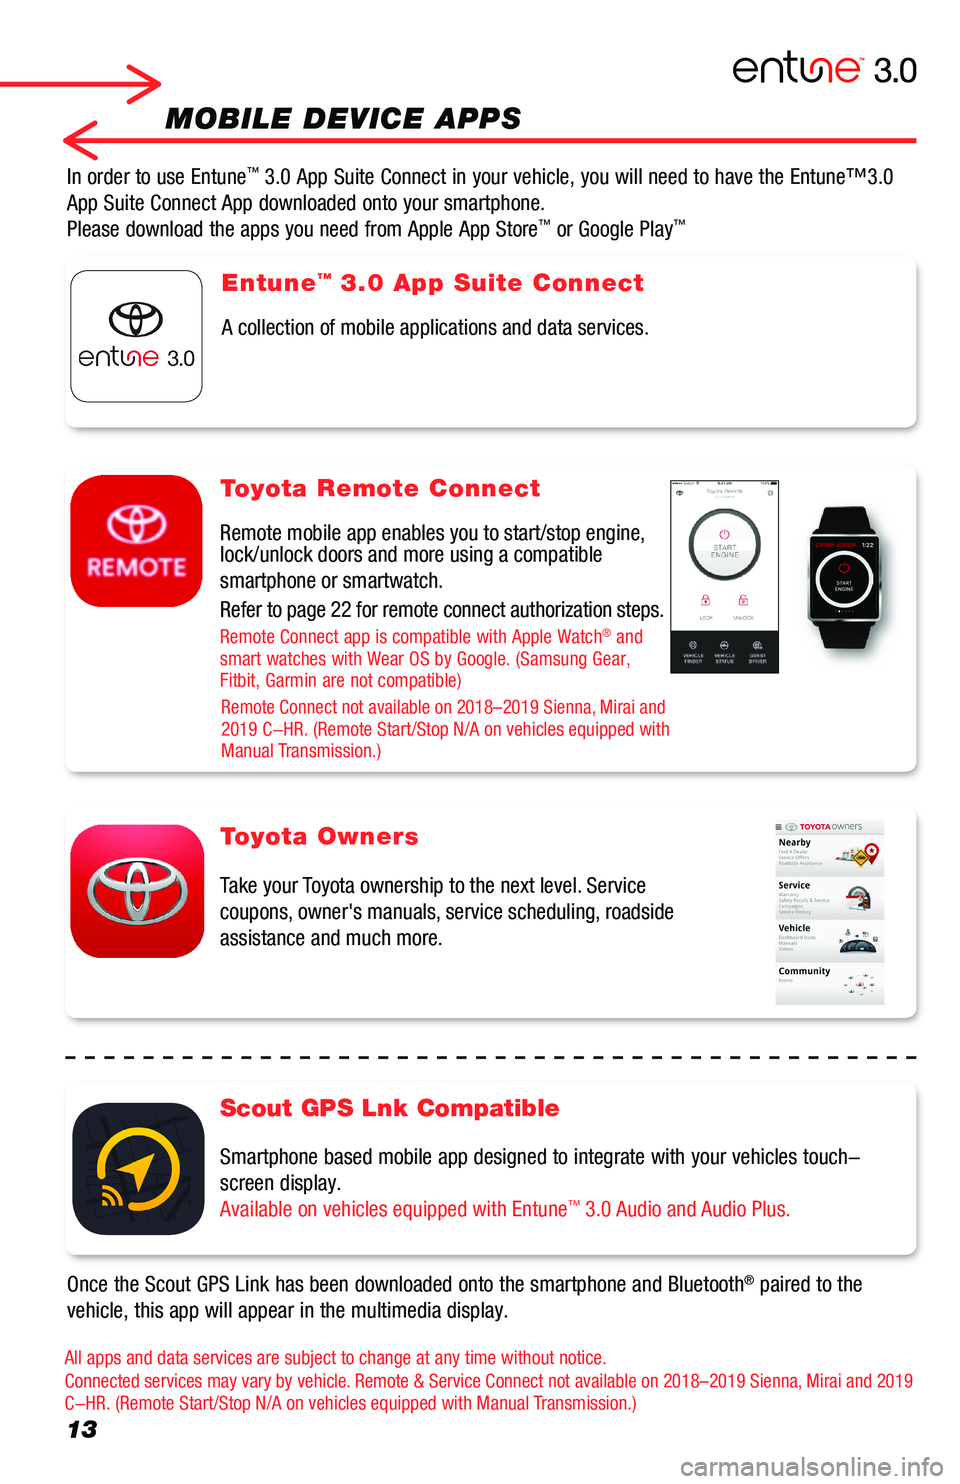 TOYOTA RAV4 2019  Accessories, Audio & Navigation (in English) 13
MOBILE DEVICE APPS
Once the Scout GPS Link has been downloaded onto the smartphone and Blue\
tooth® paired to the 
vehicle, this app will appear in the multimedia display.
In order to use Entune�